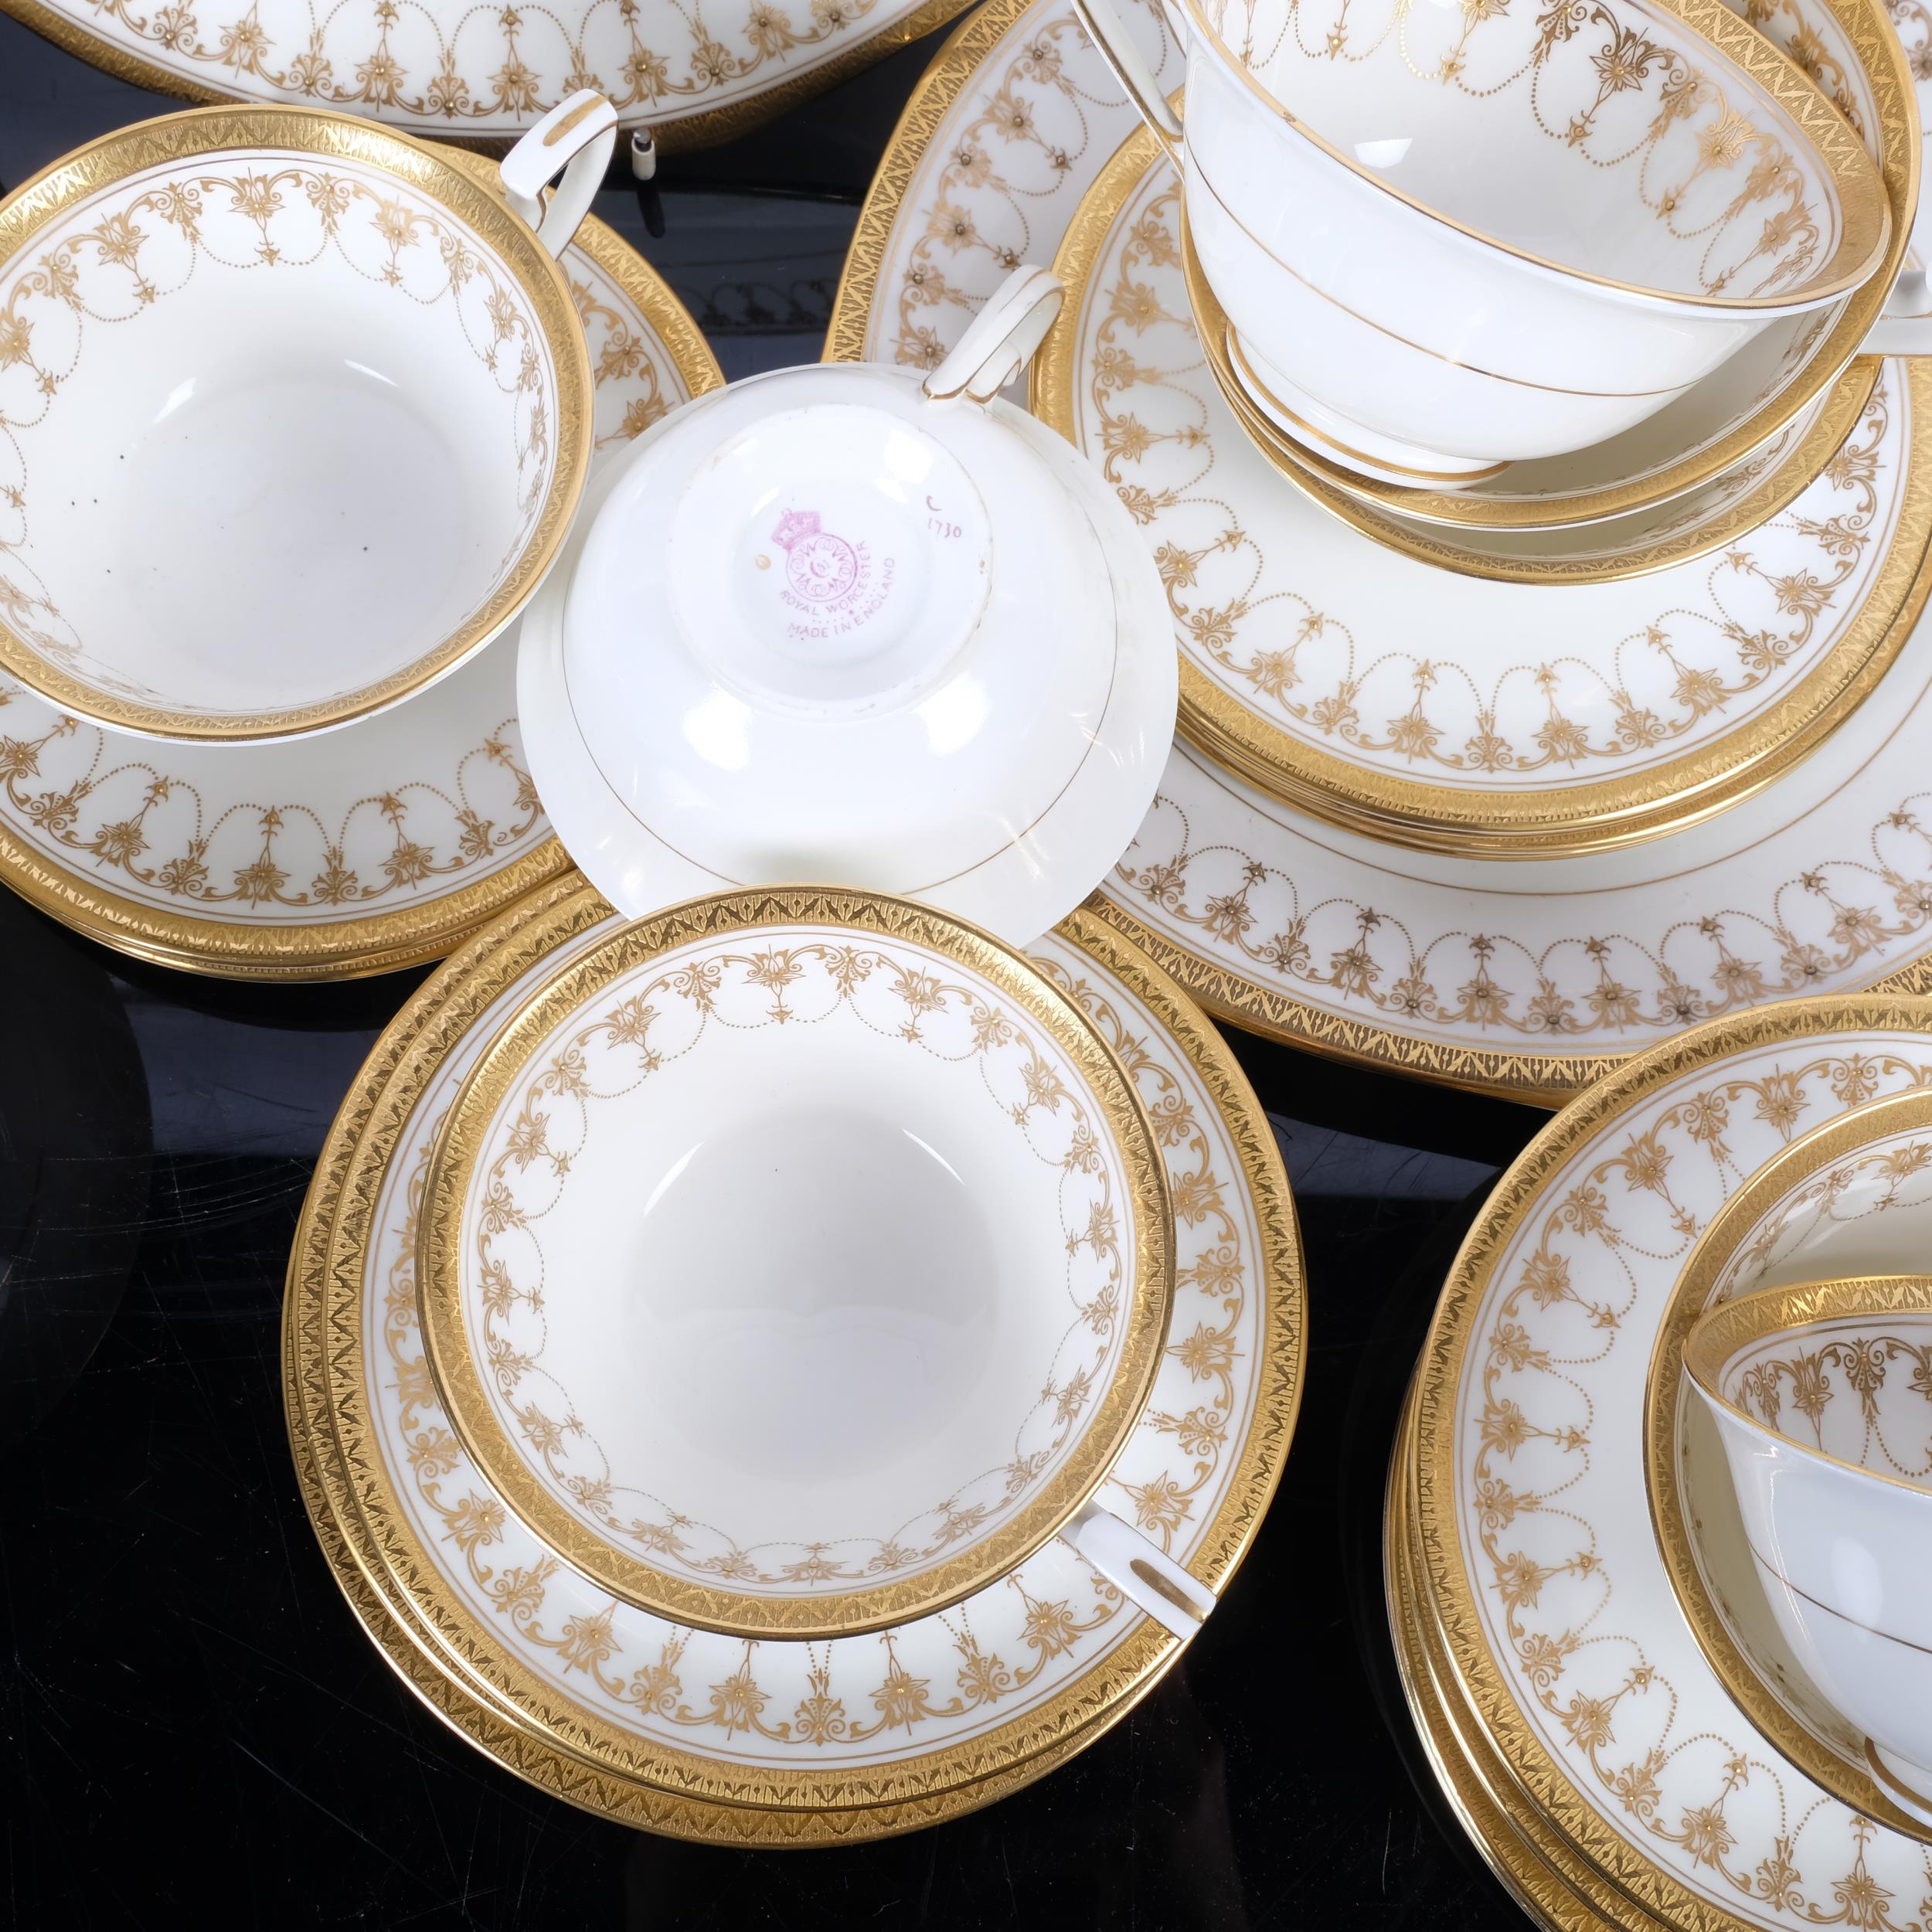 Royal Worcester tea service for 12 people, with gilded swag decoration, including 2 cake plates, jug - Image 2 of 2